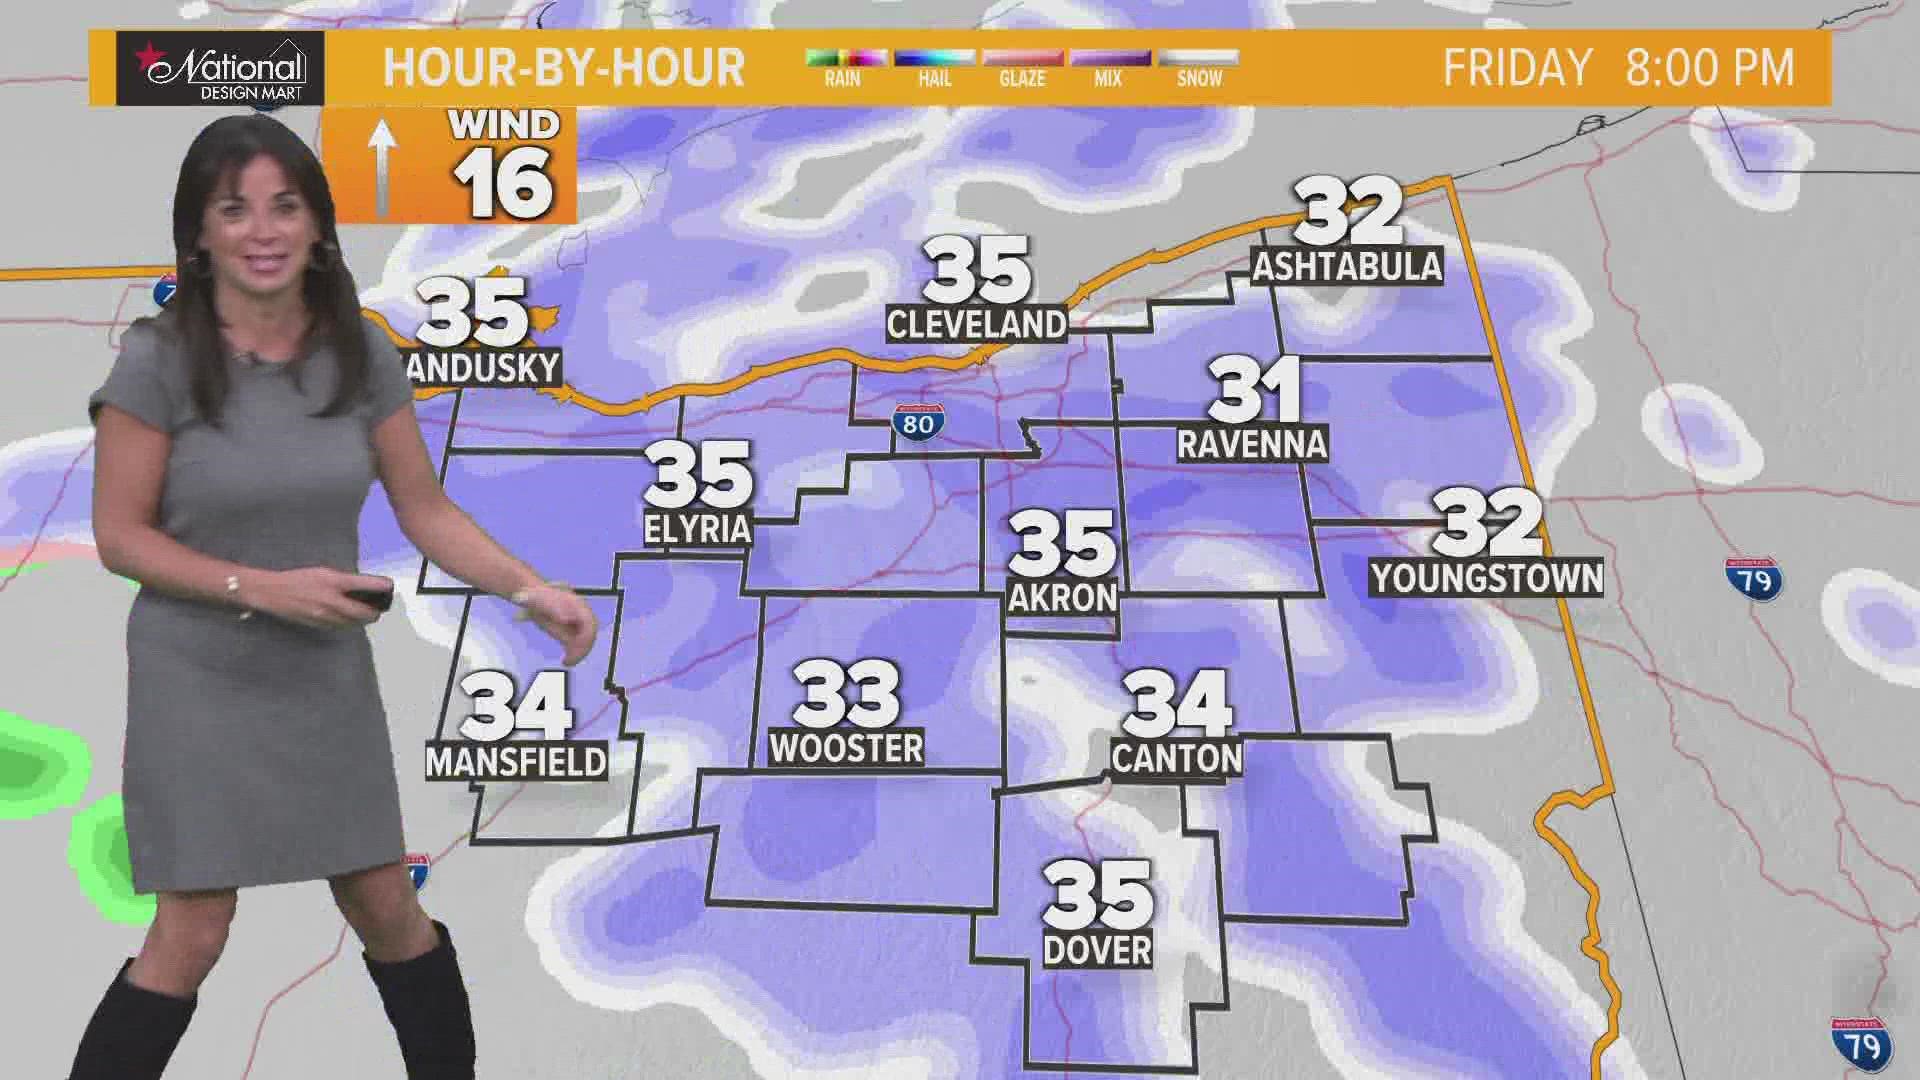 We have more snow on the way this evening. Hollie Strano has the hour-by-hour details in her morning weather forecast for Friday, January 27, 2023.